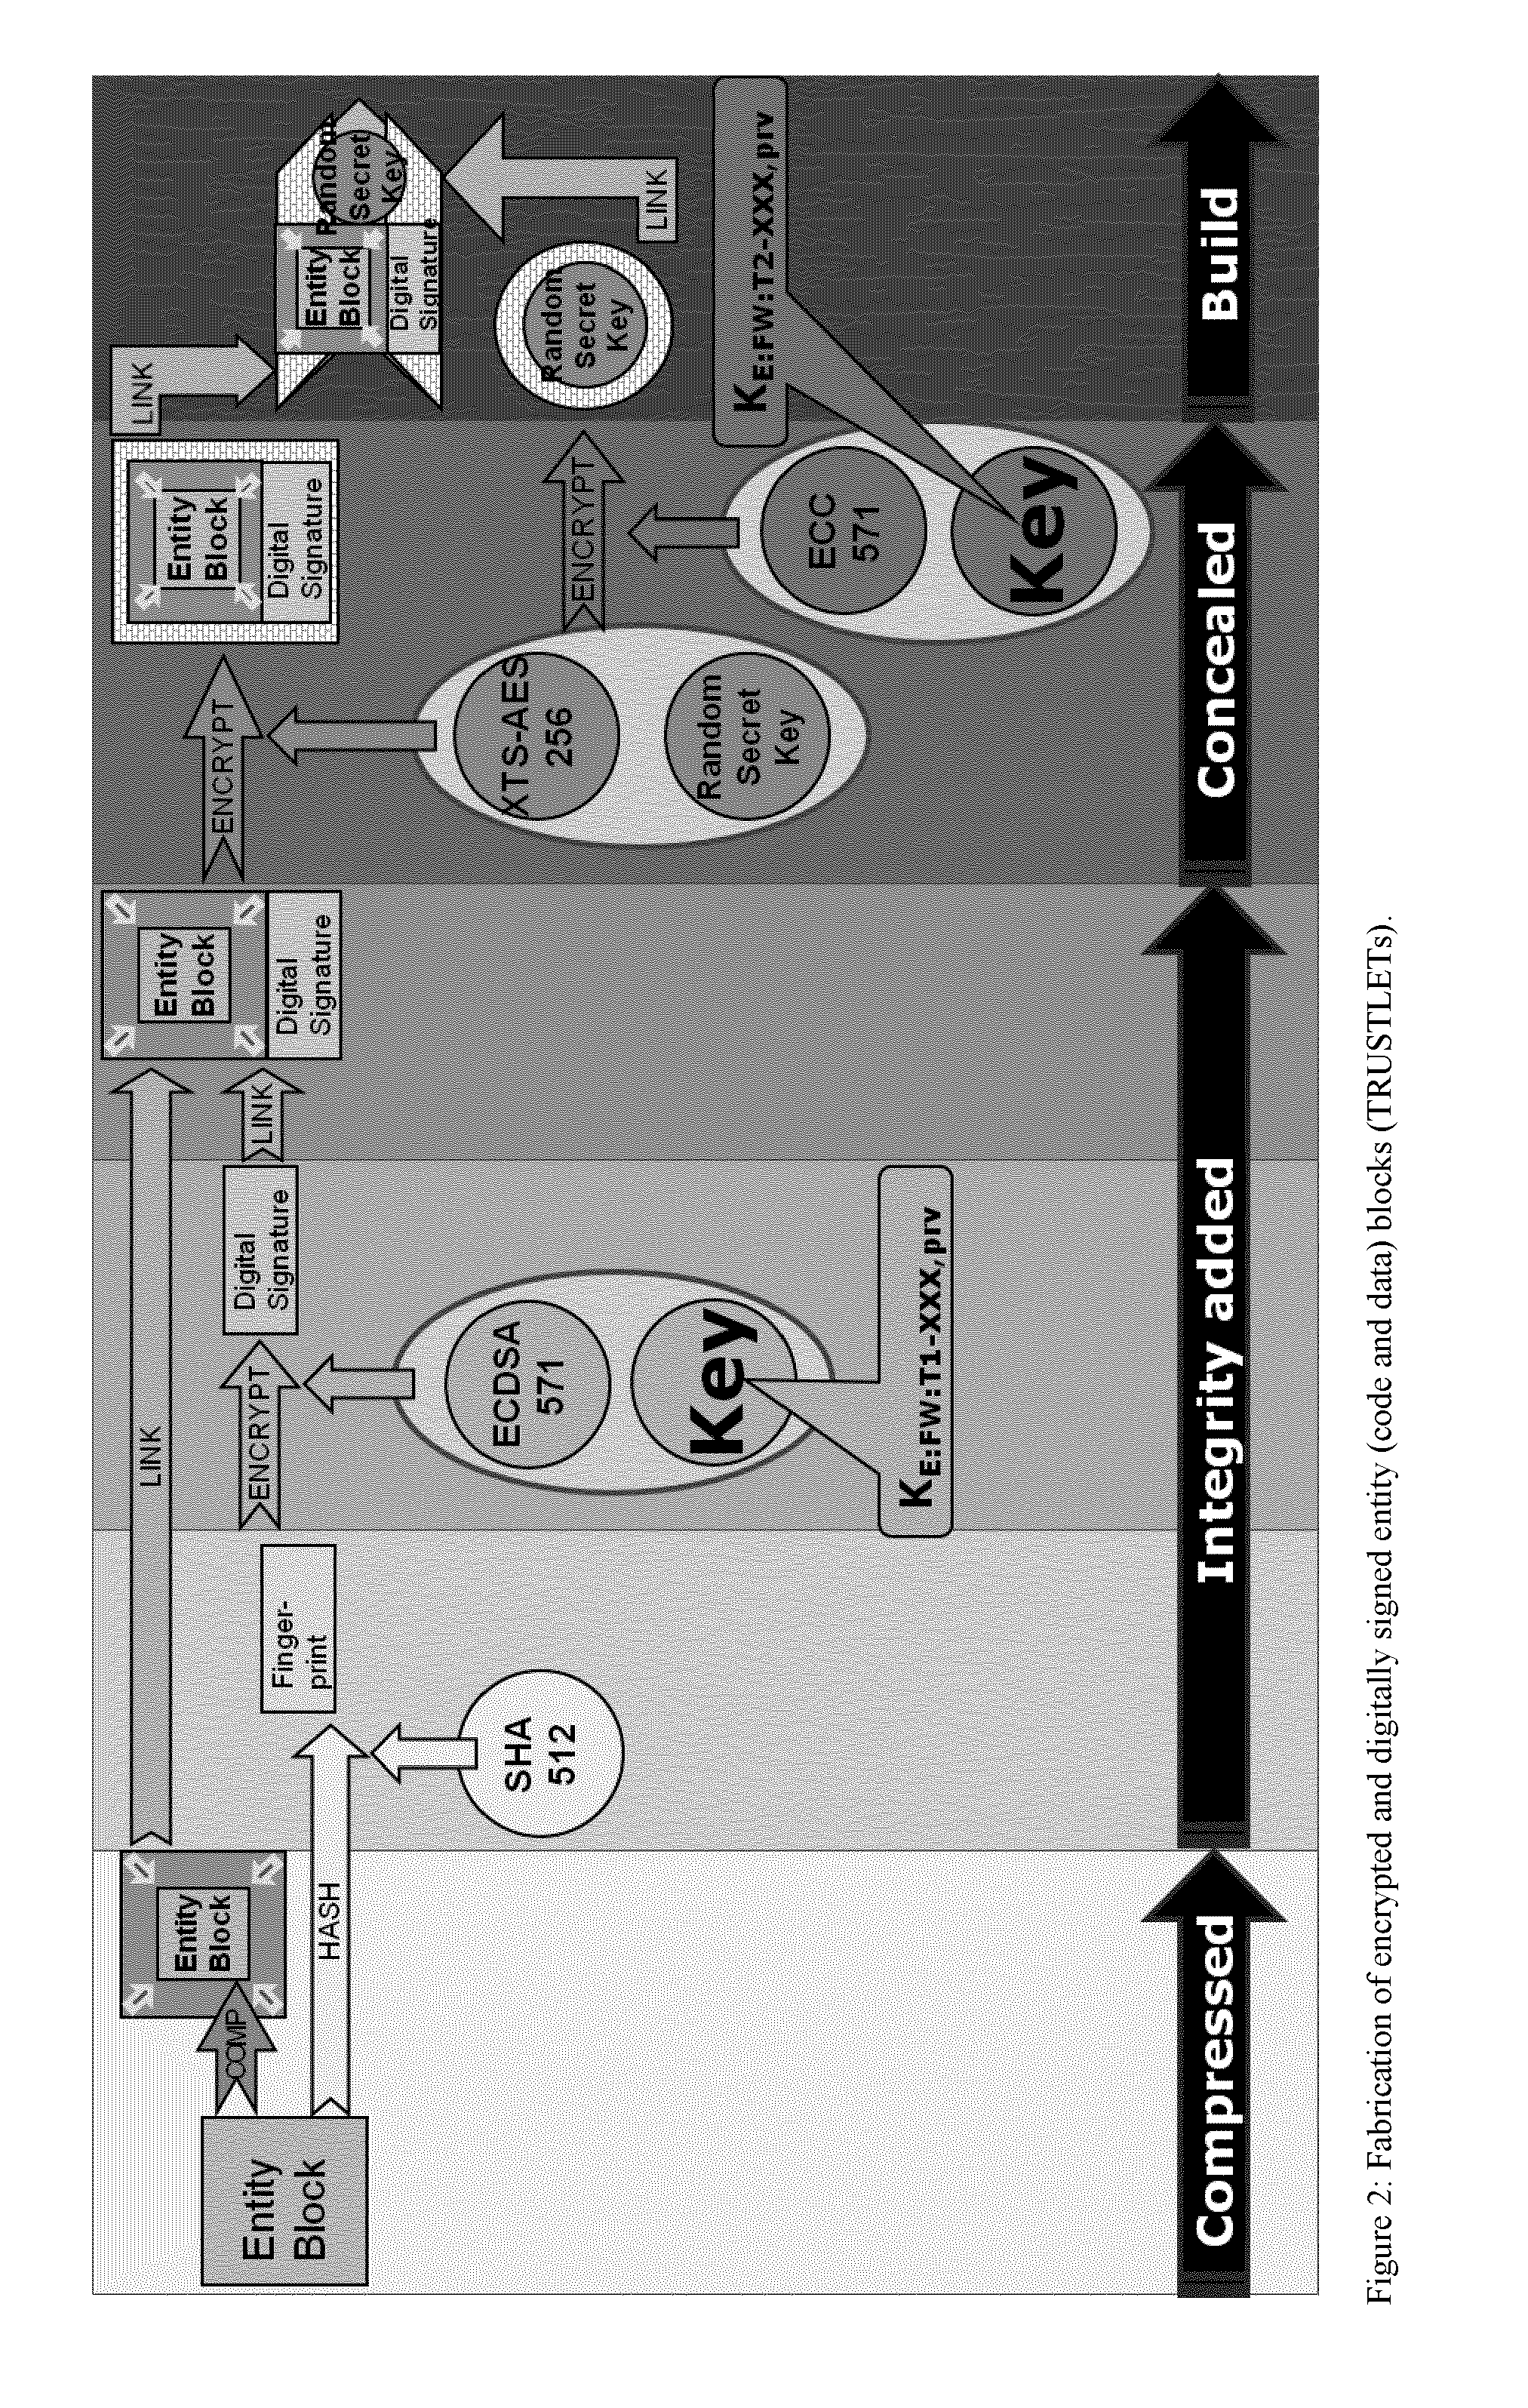 Tamper-protected hardware and method for using same